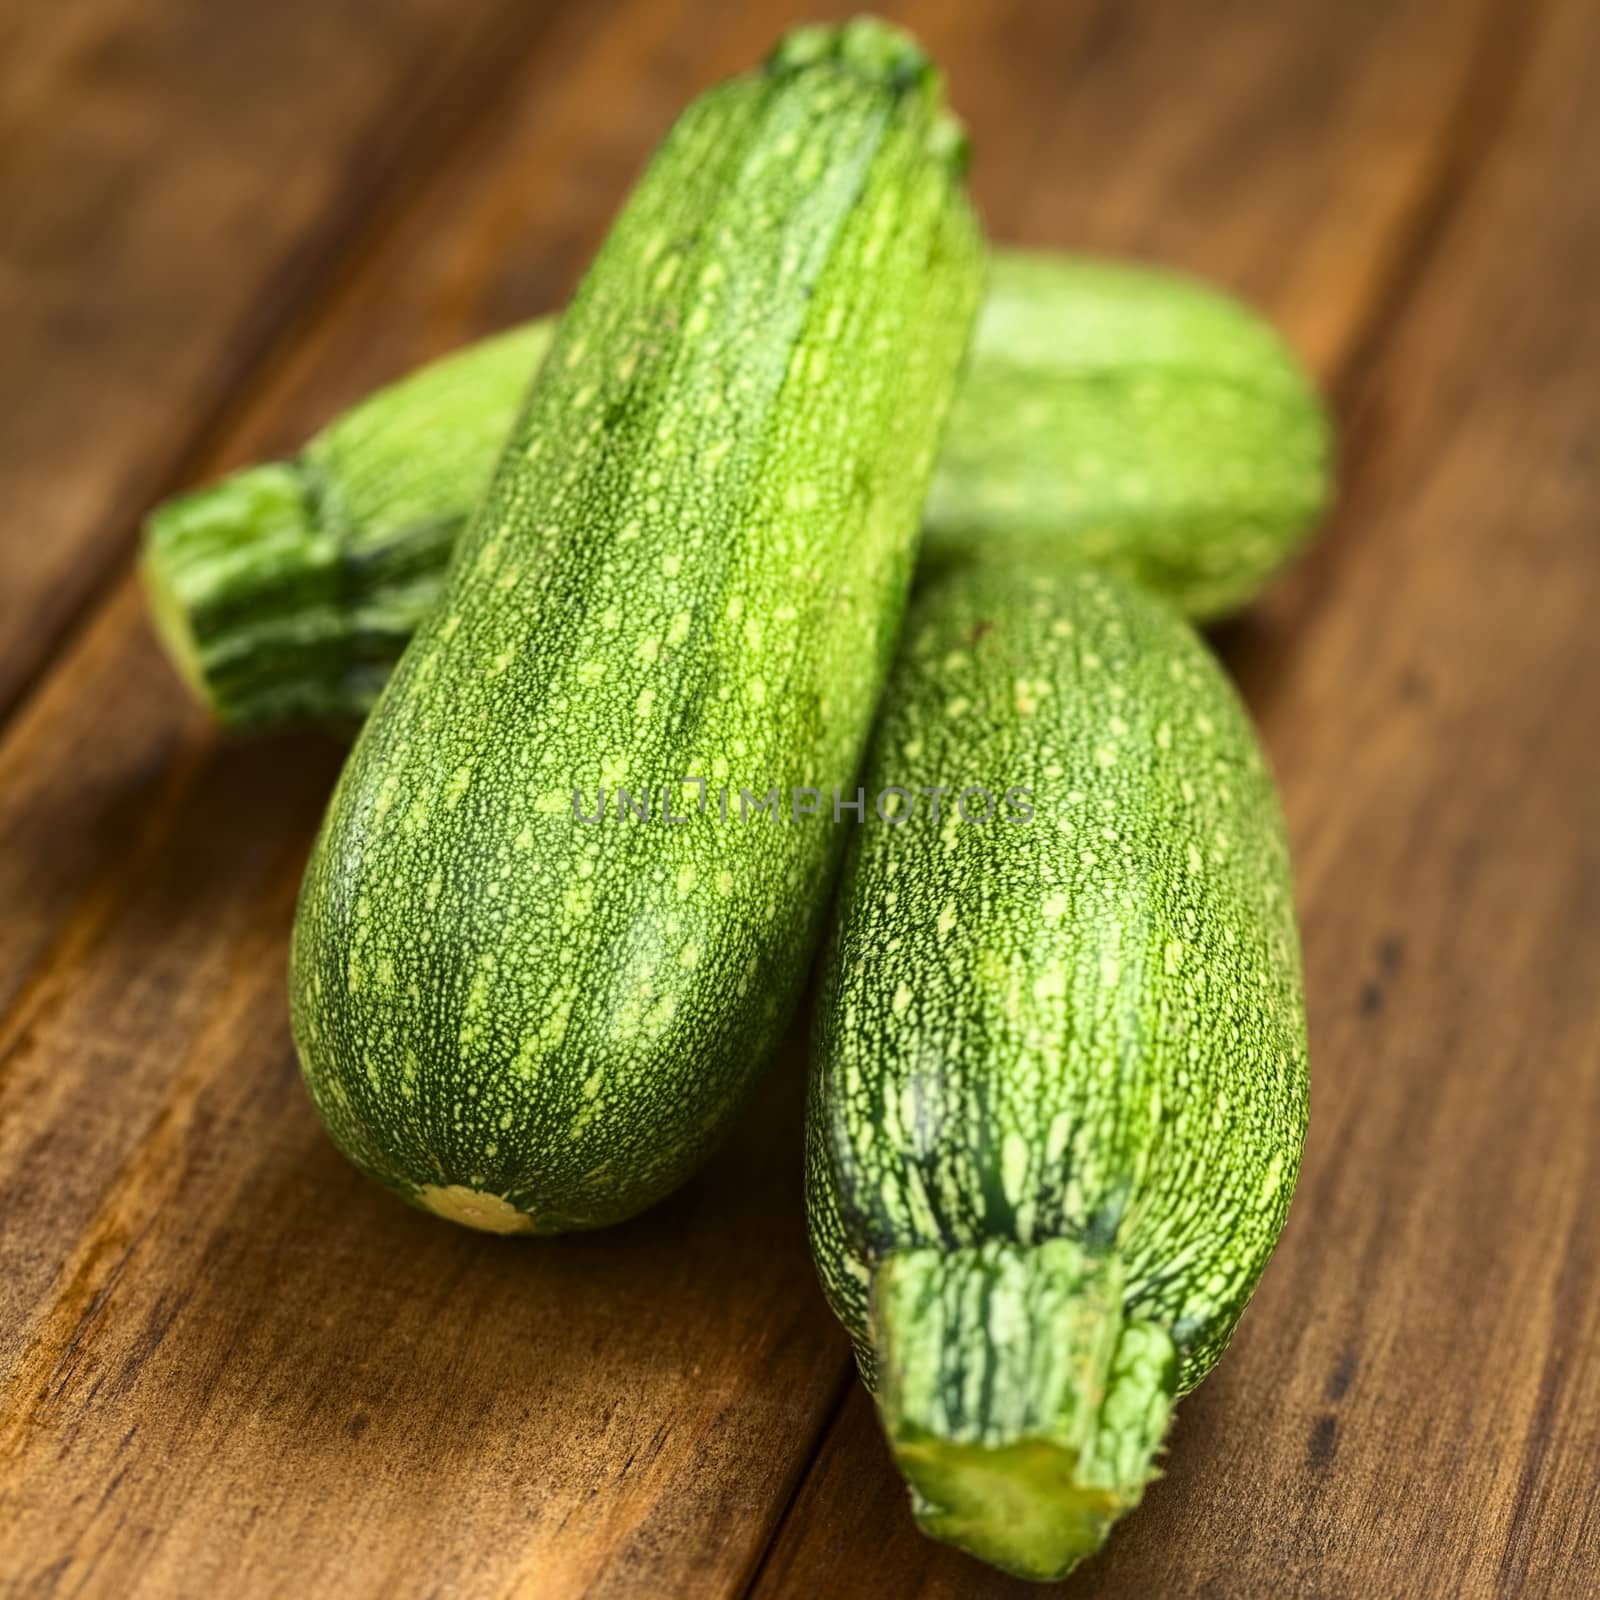 Raw zucchini on dark wood (Selective Focus, Focus one third into the image)